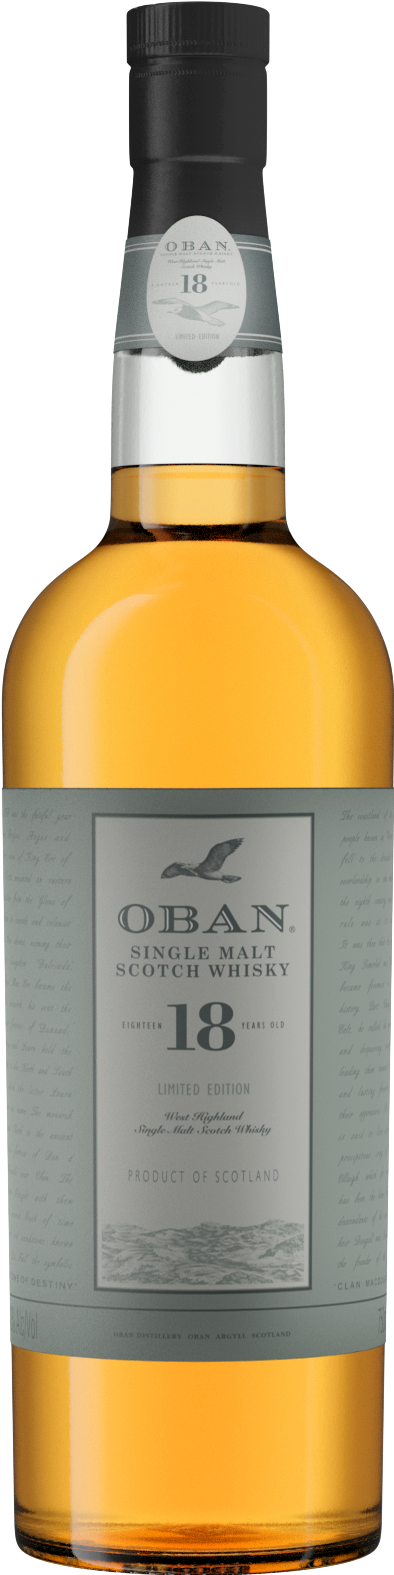 Buy Oban 18 Years Old Scotch Whisky Online -Craft City